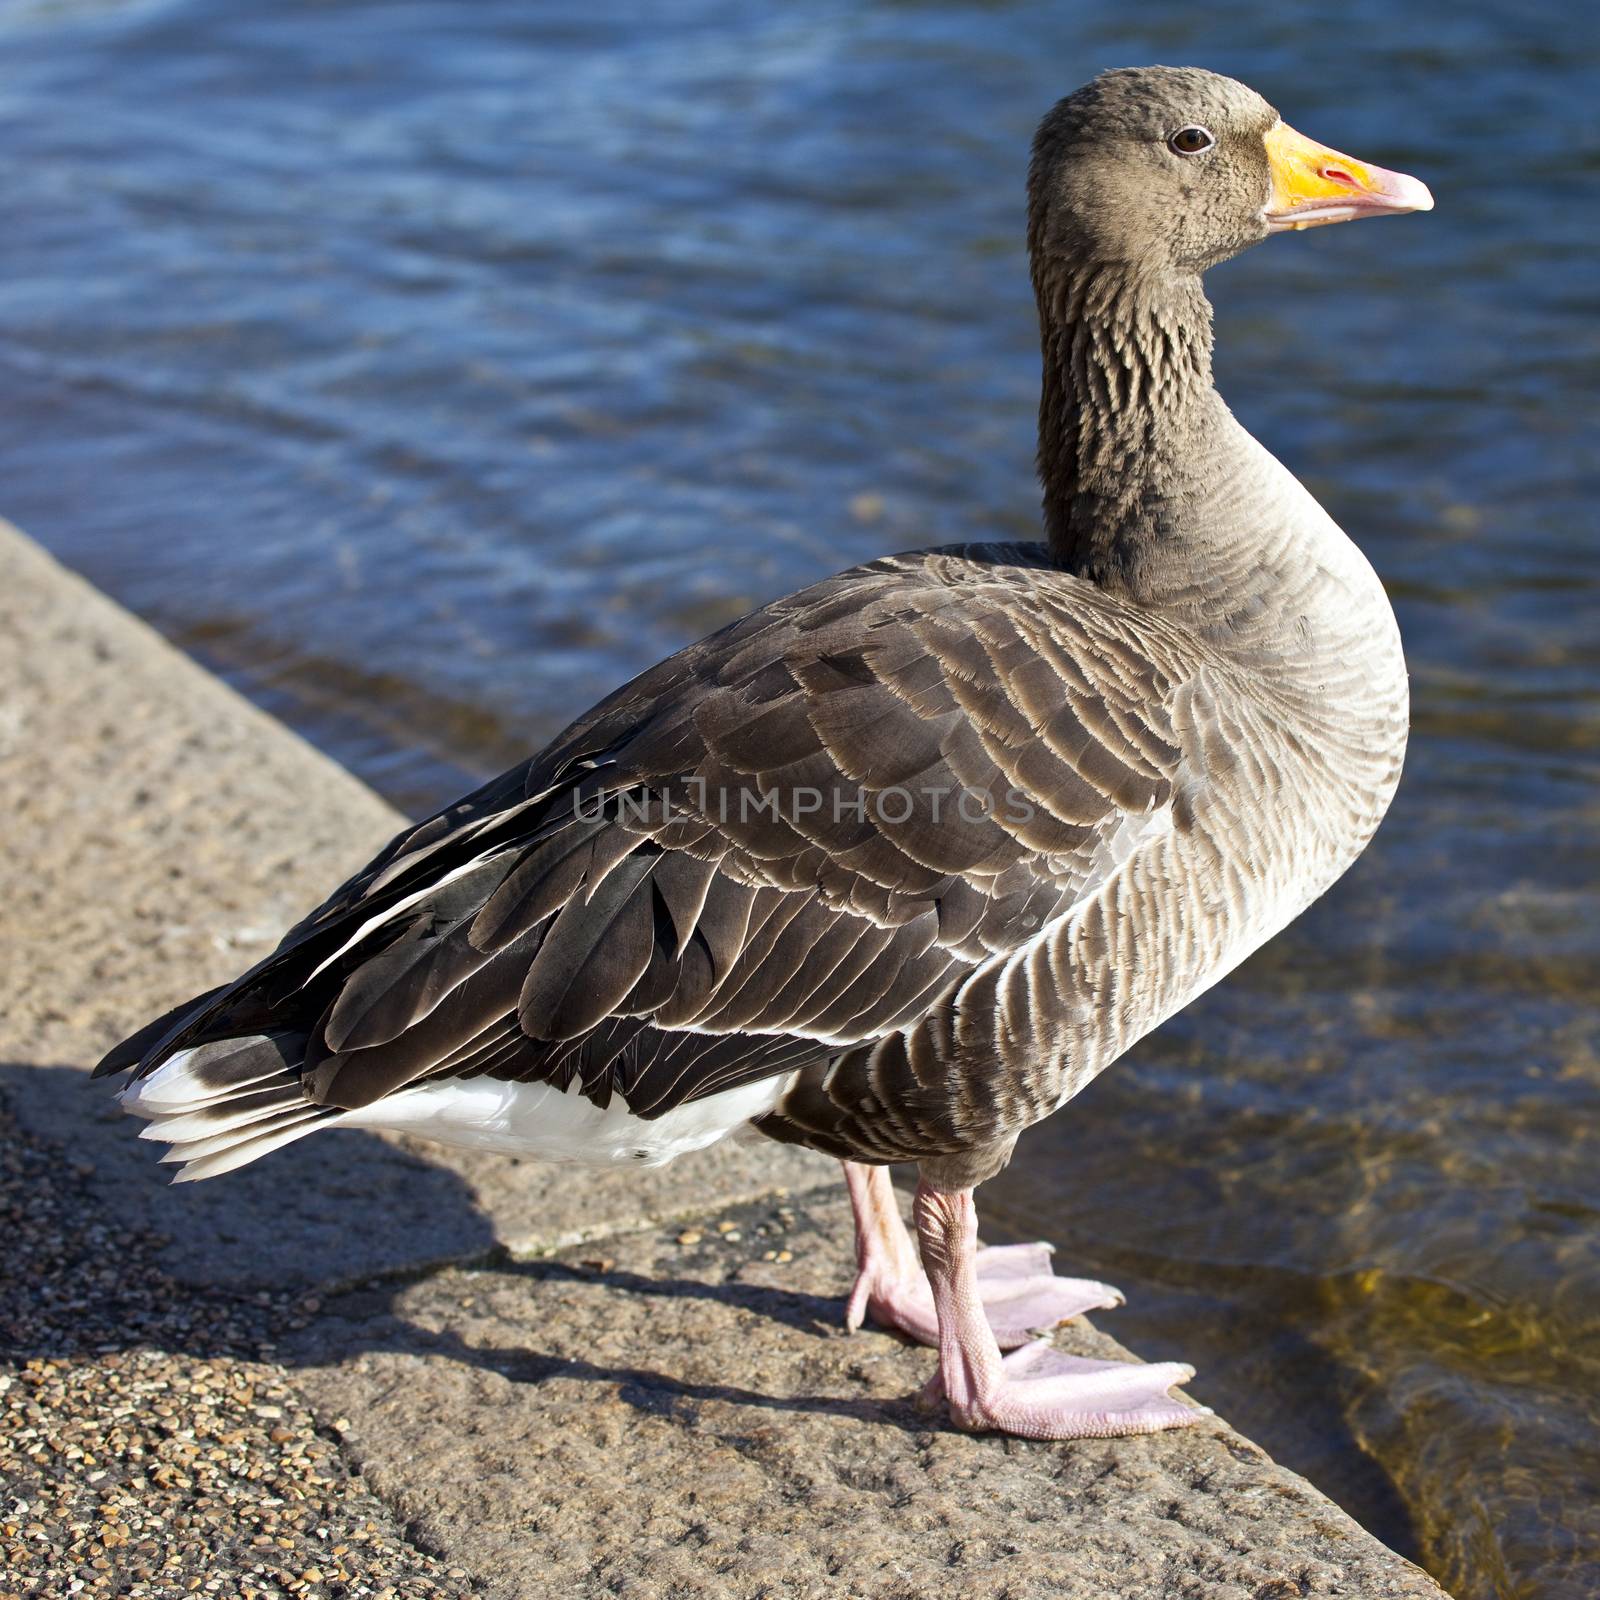 A duck sitting by the Serpentine in Hyde Park, London.